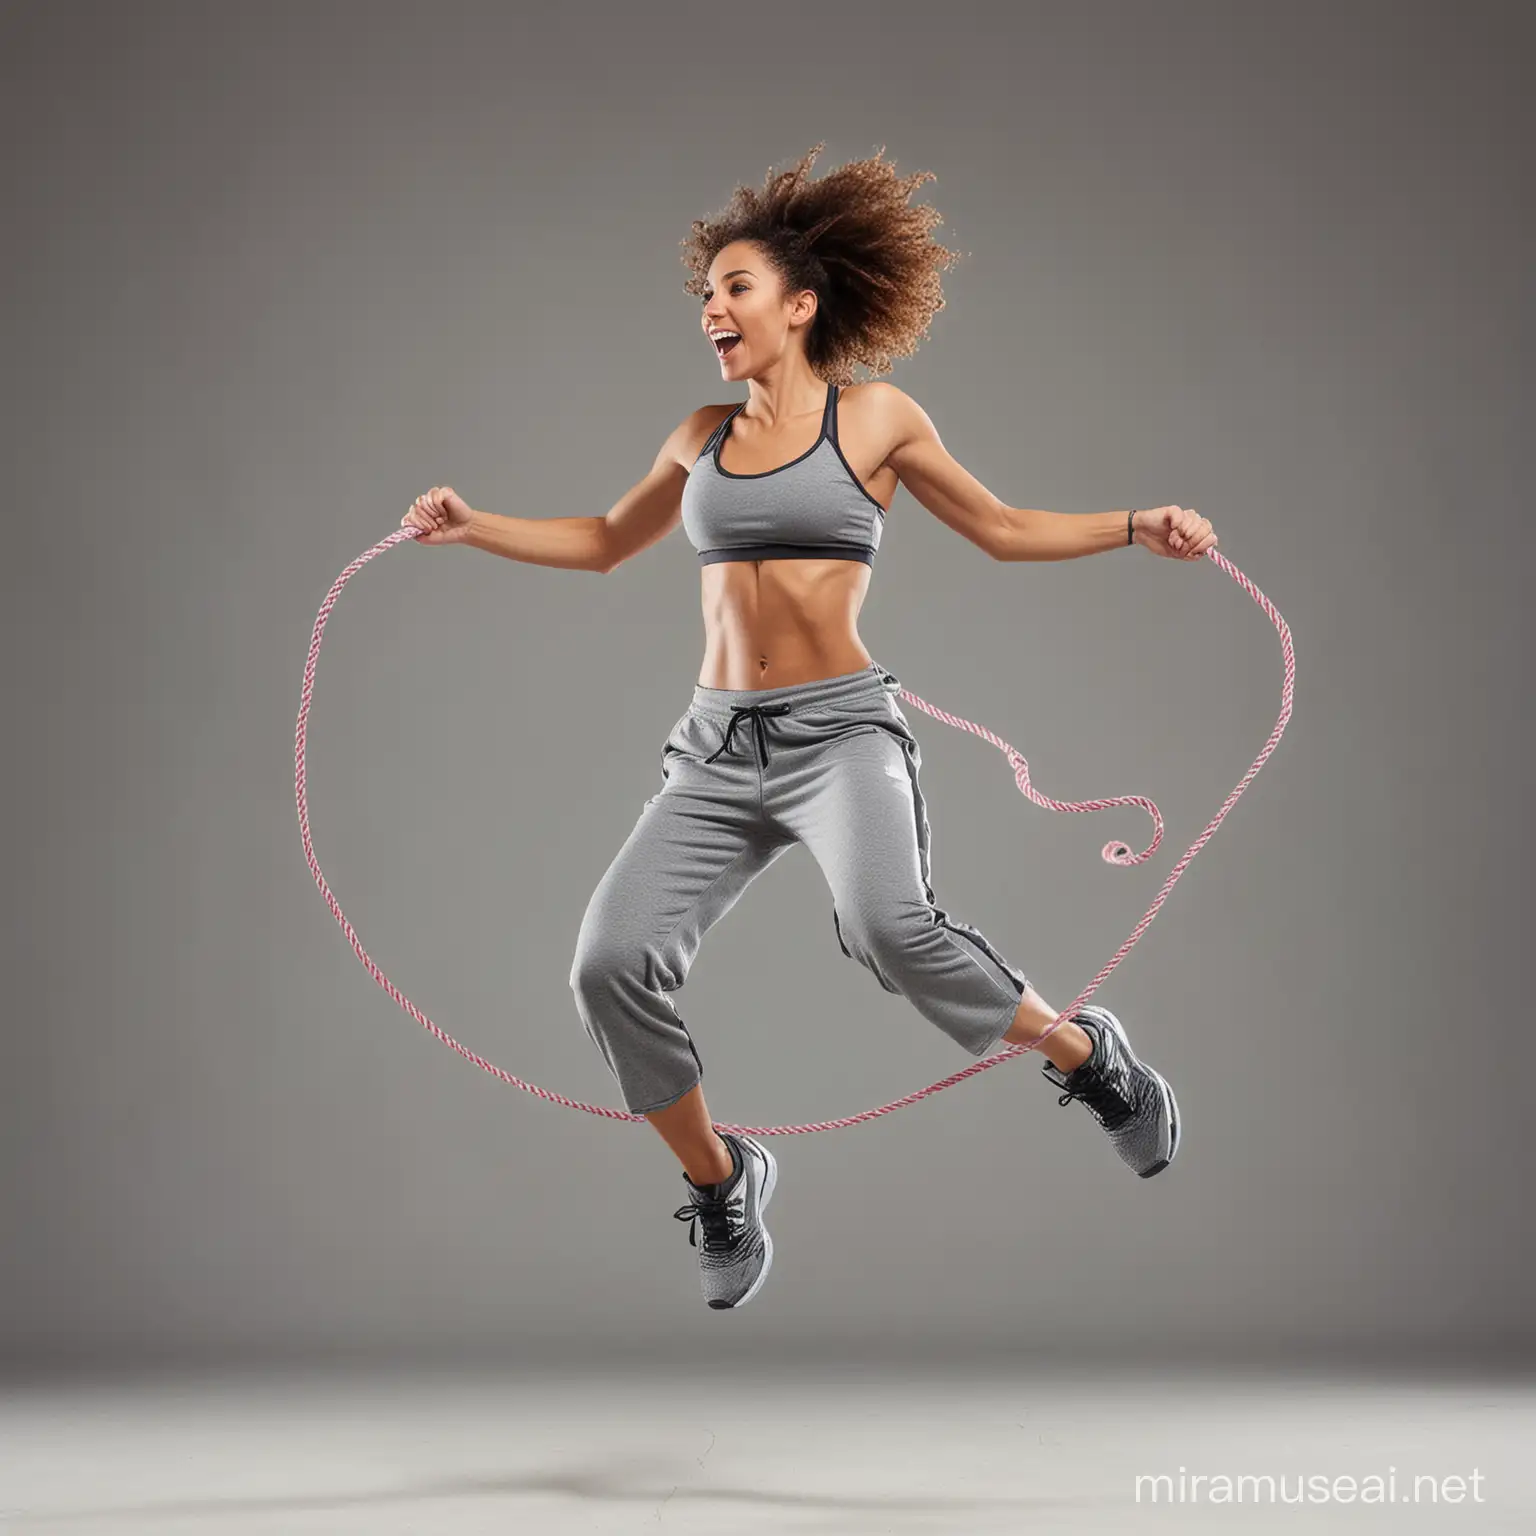 Energetic Woman Jumping Rope Exercise